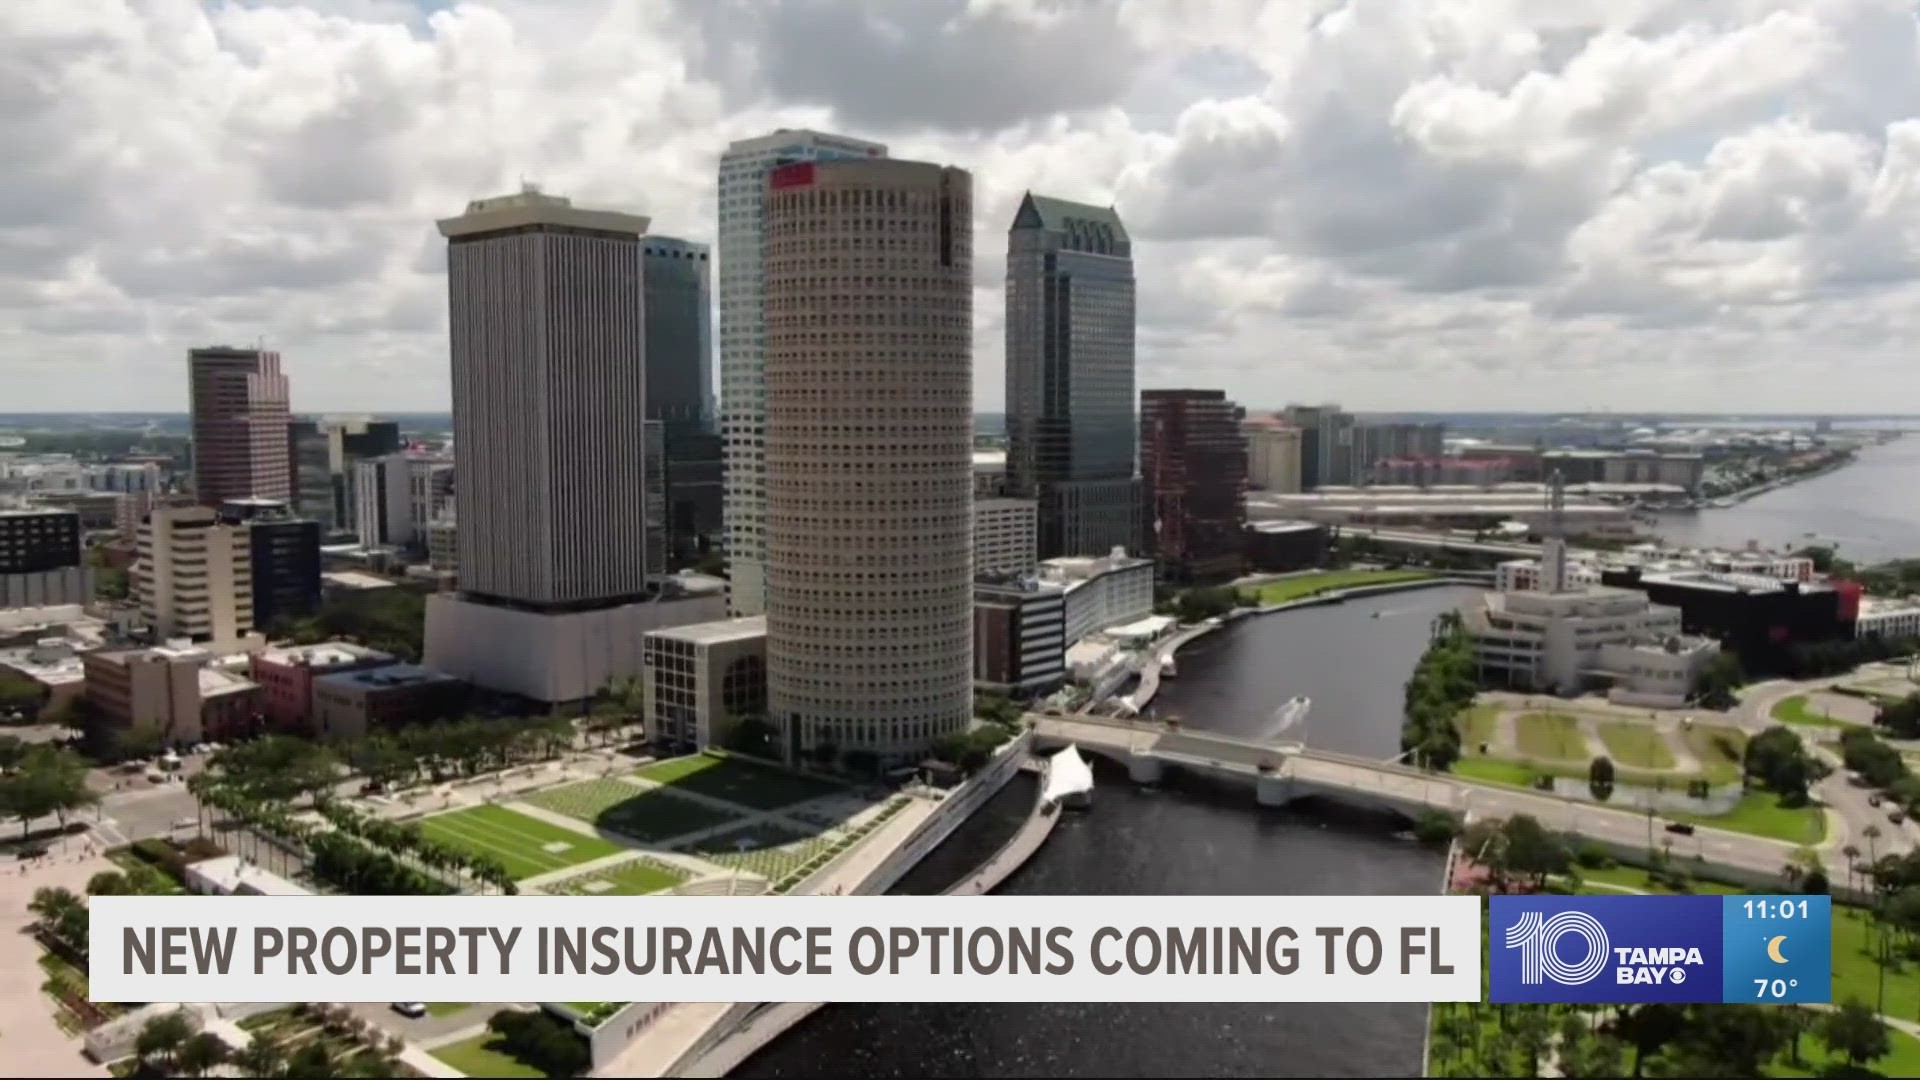 Right now, state-run Citizens Property Insurance is looking to offload policyholders.